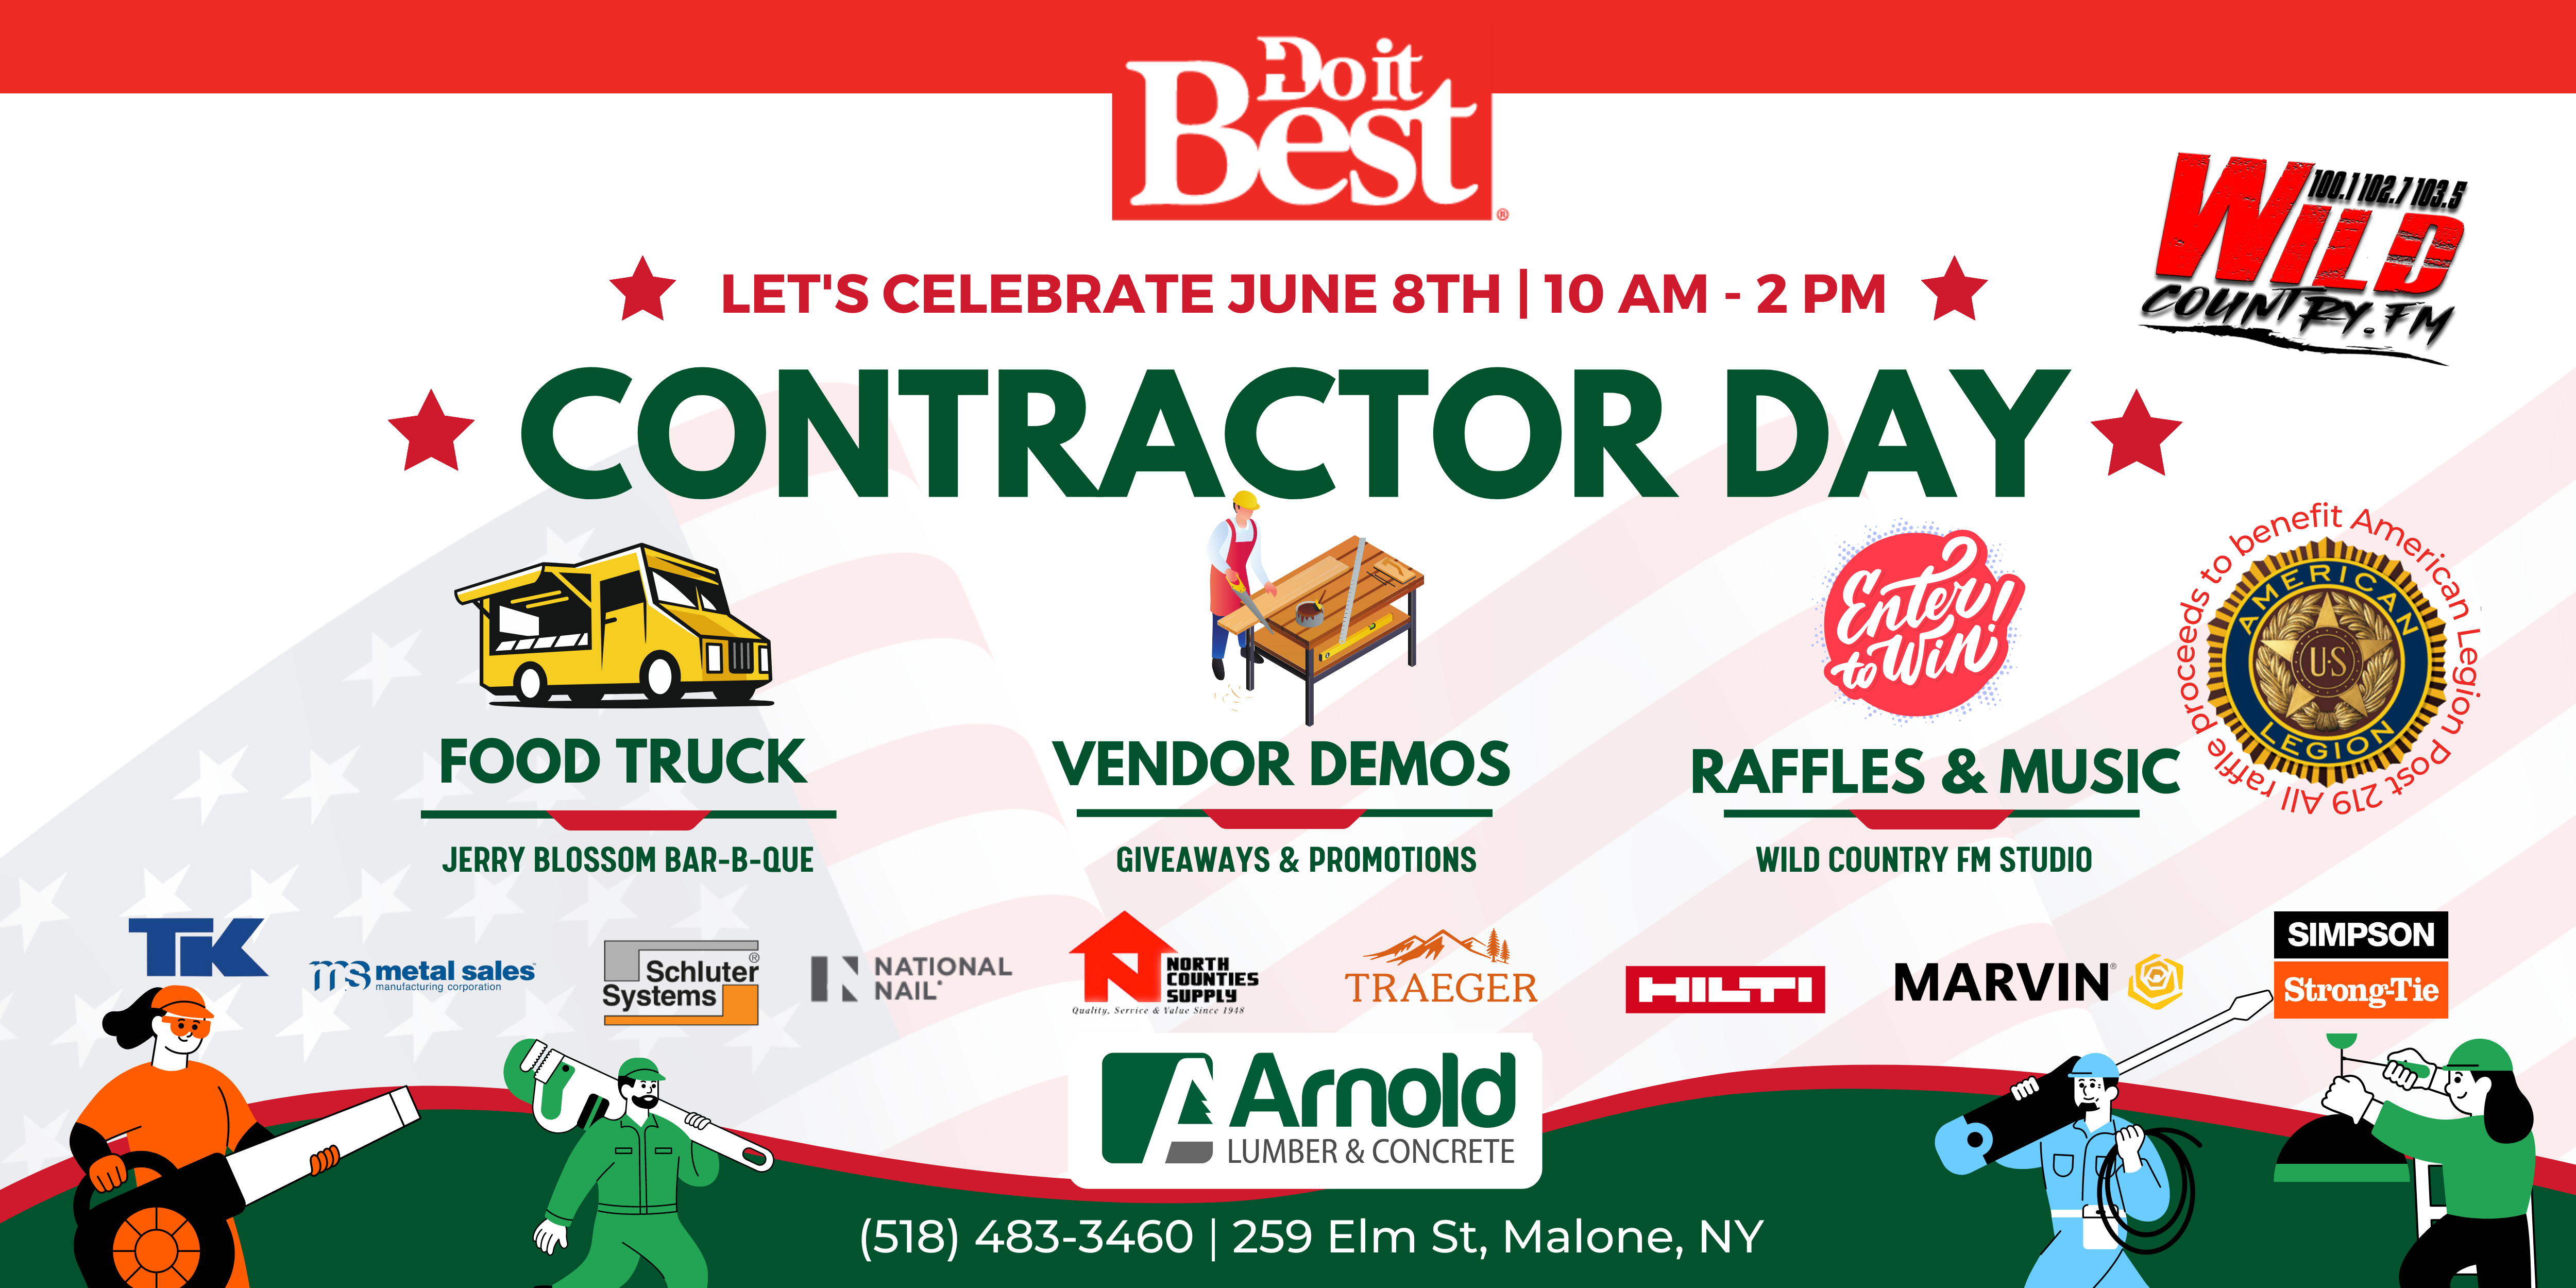 Arnold Lumber & Concrete - Contractor Day - Malone, NY